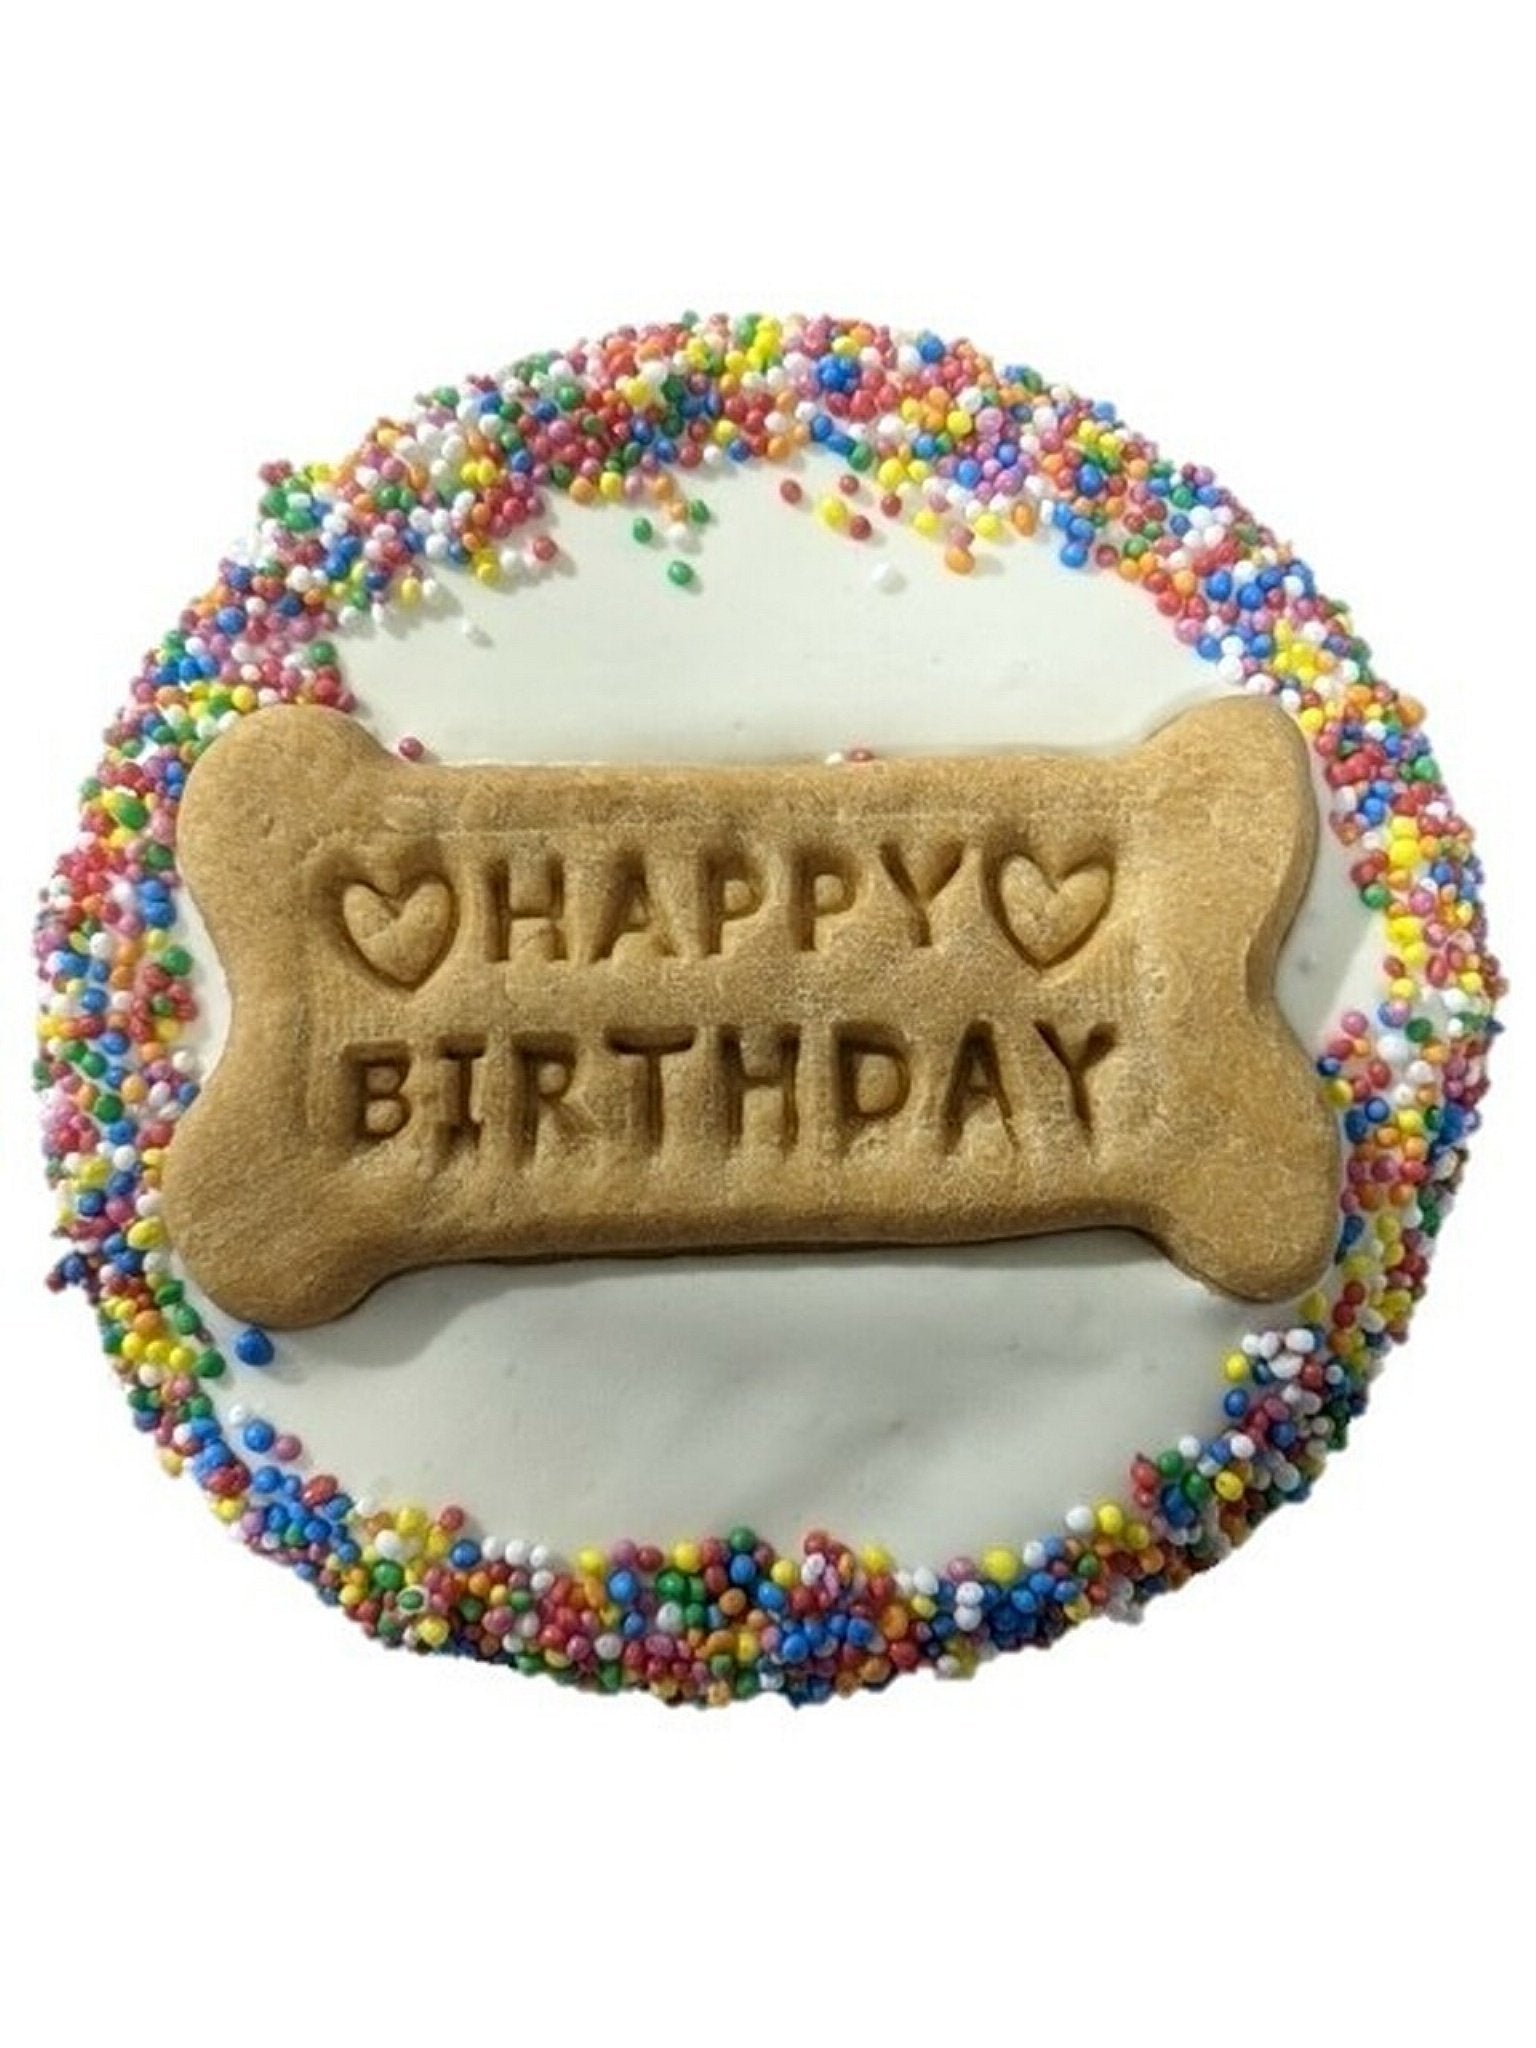 Huds and Toke Puppy Birthday Cake - Carob Frosted